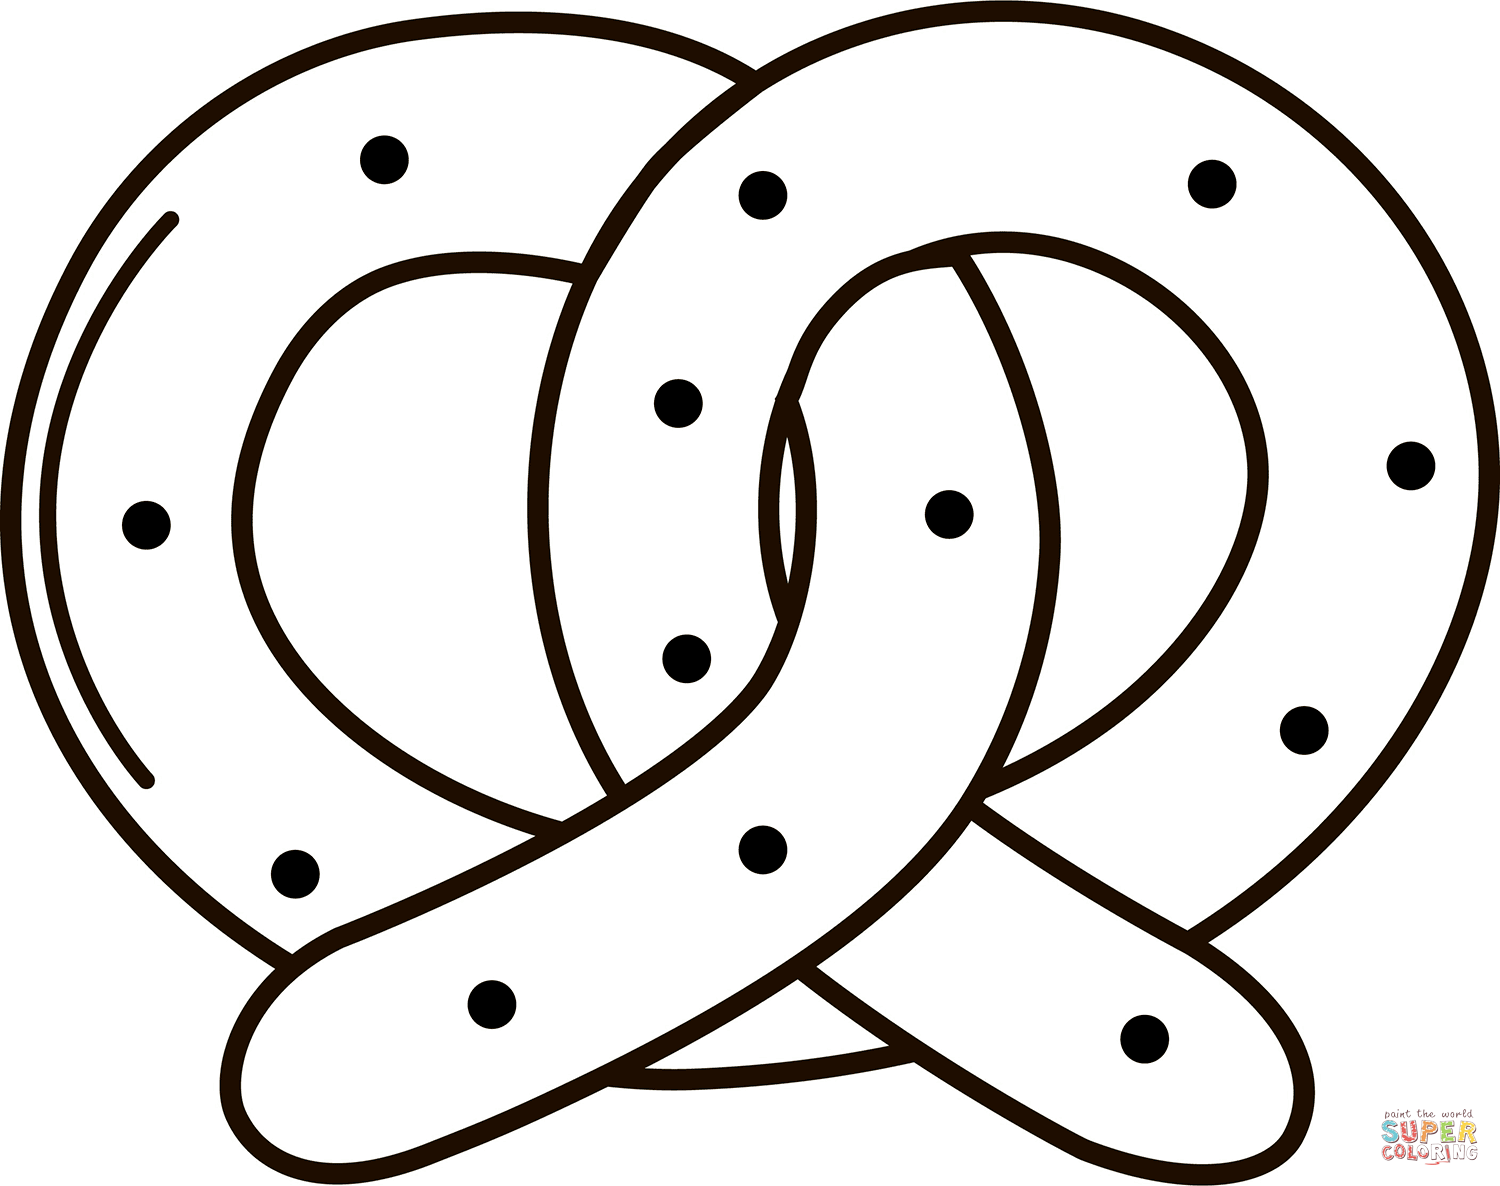 Pretzel coloring page free printable coloring pages